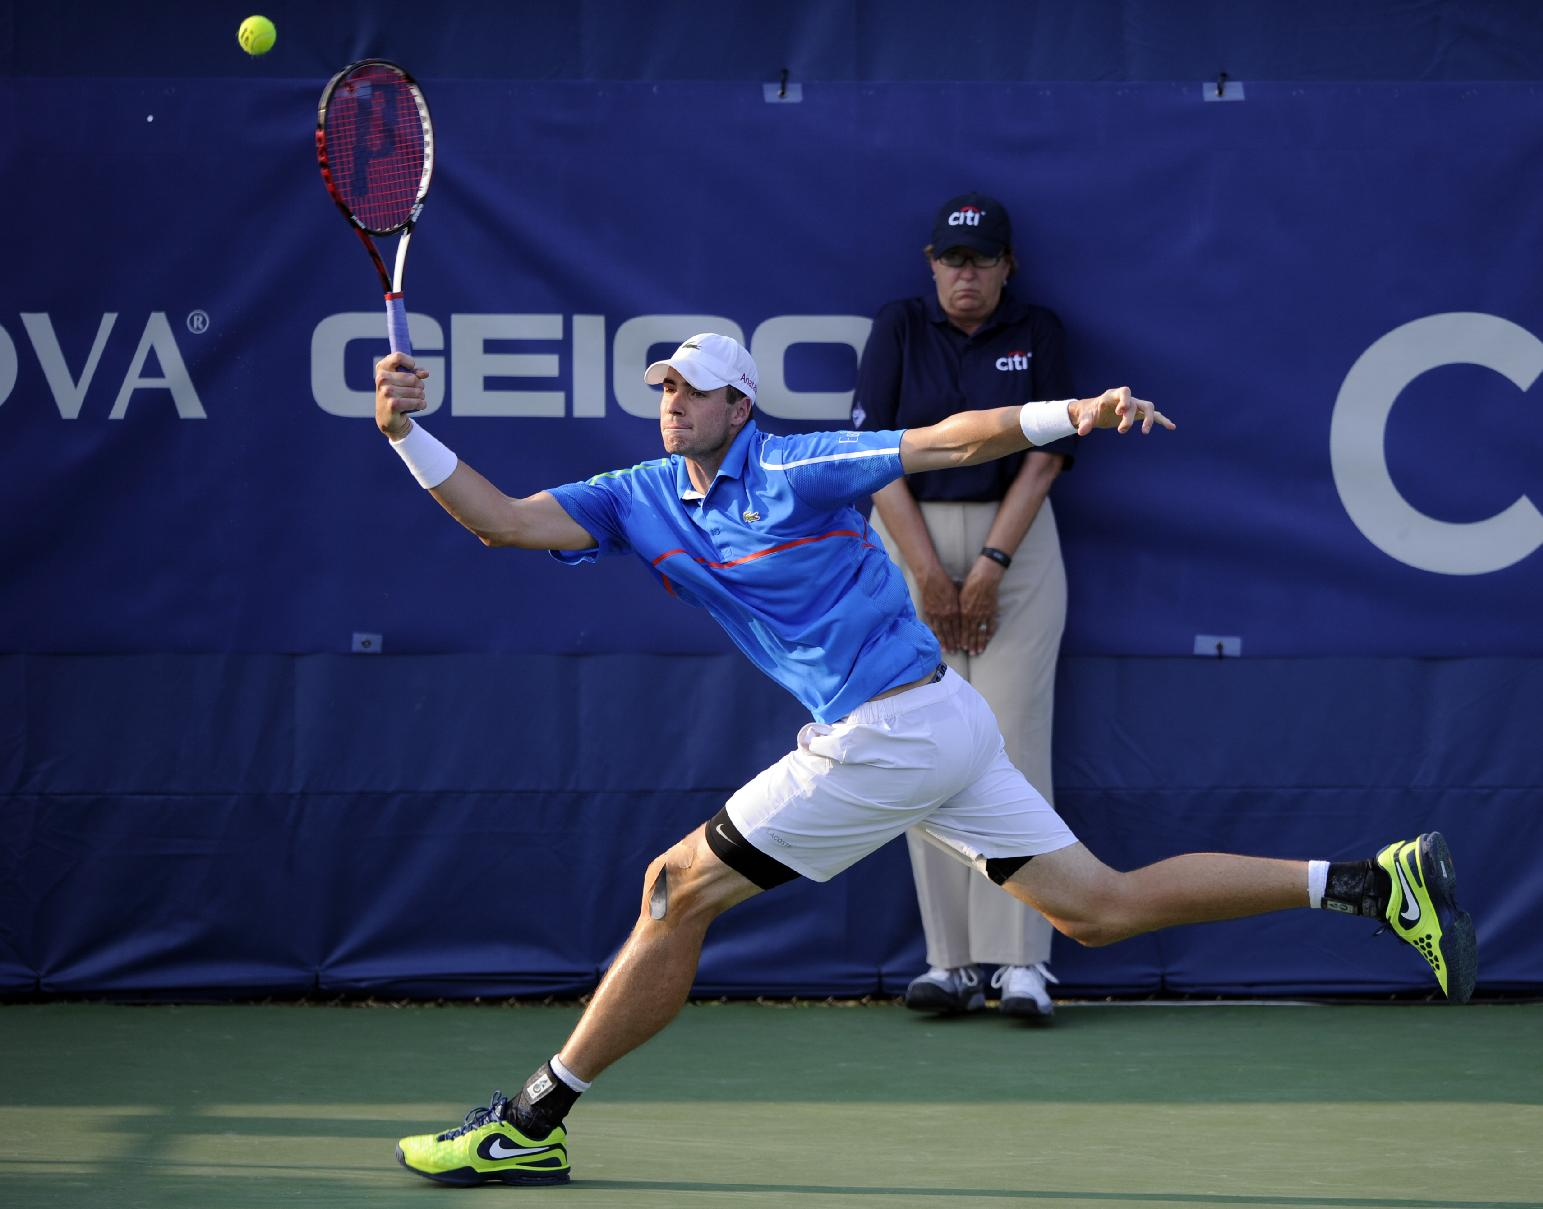 Disappointed by Citi Open Snub, Isner Speaks Out 